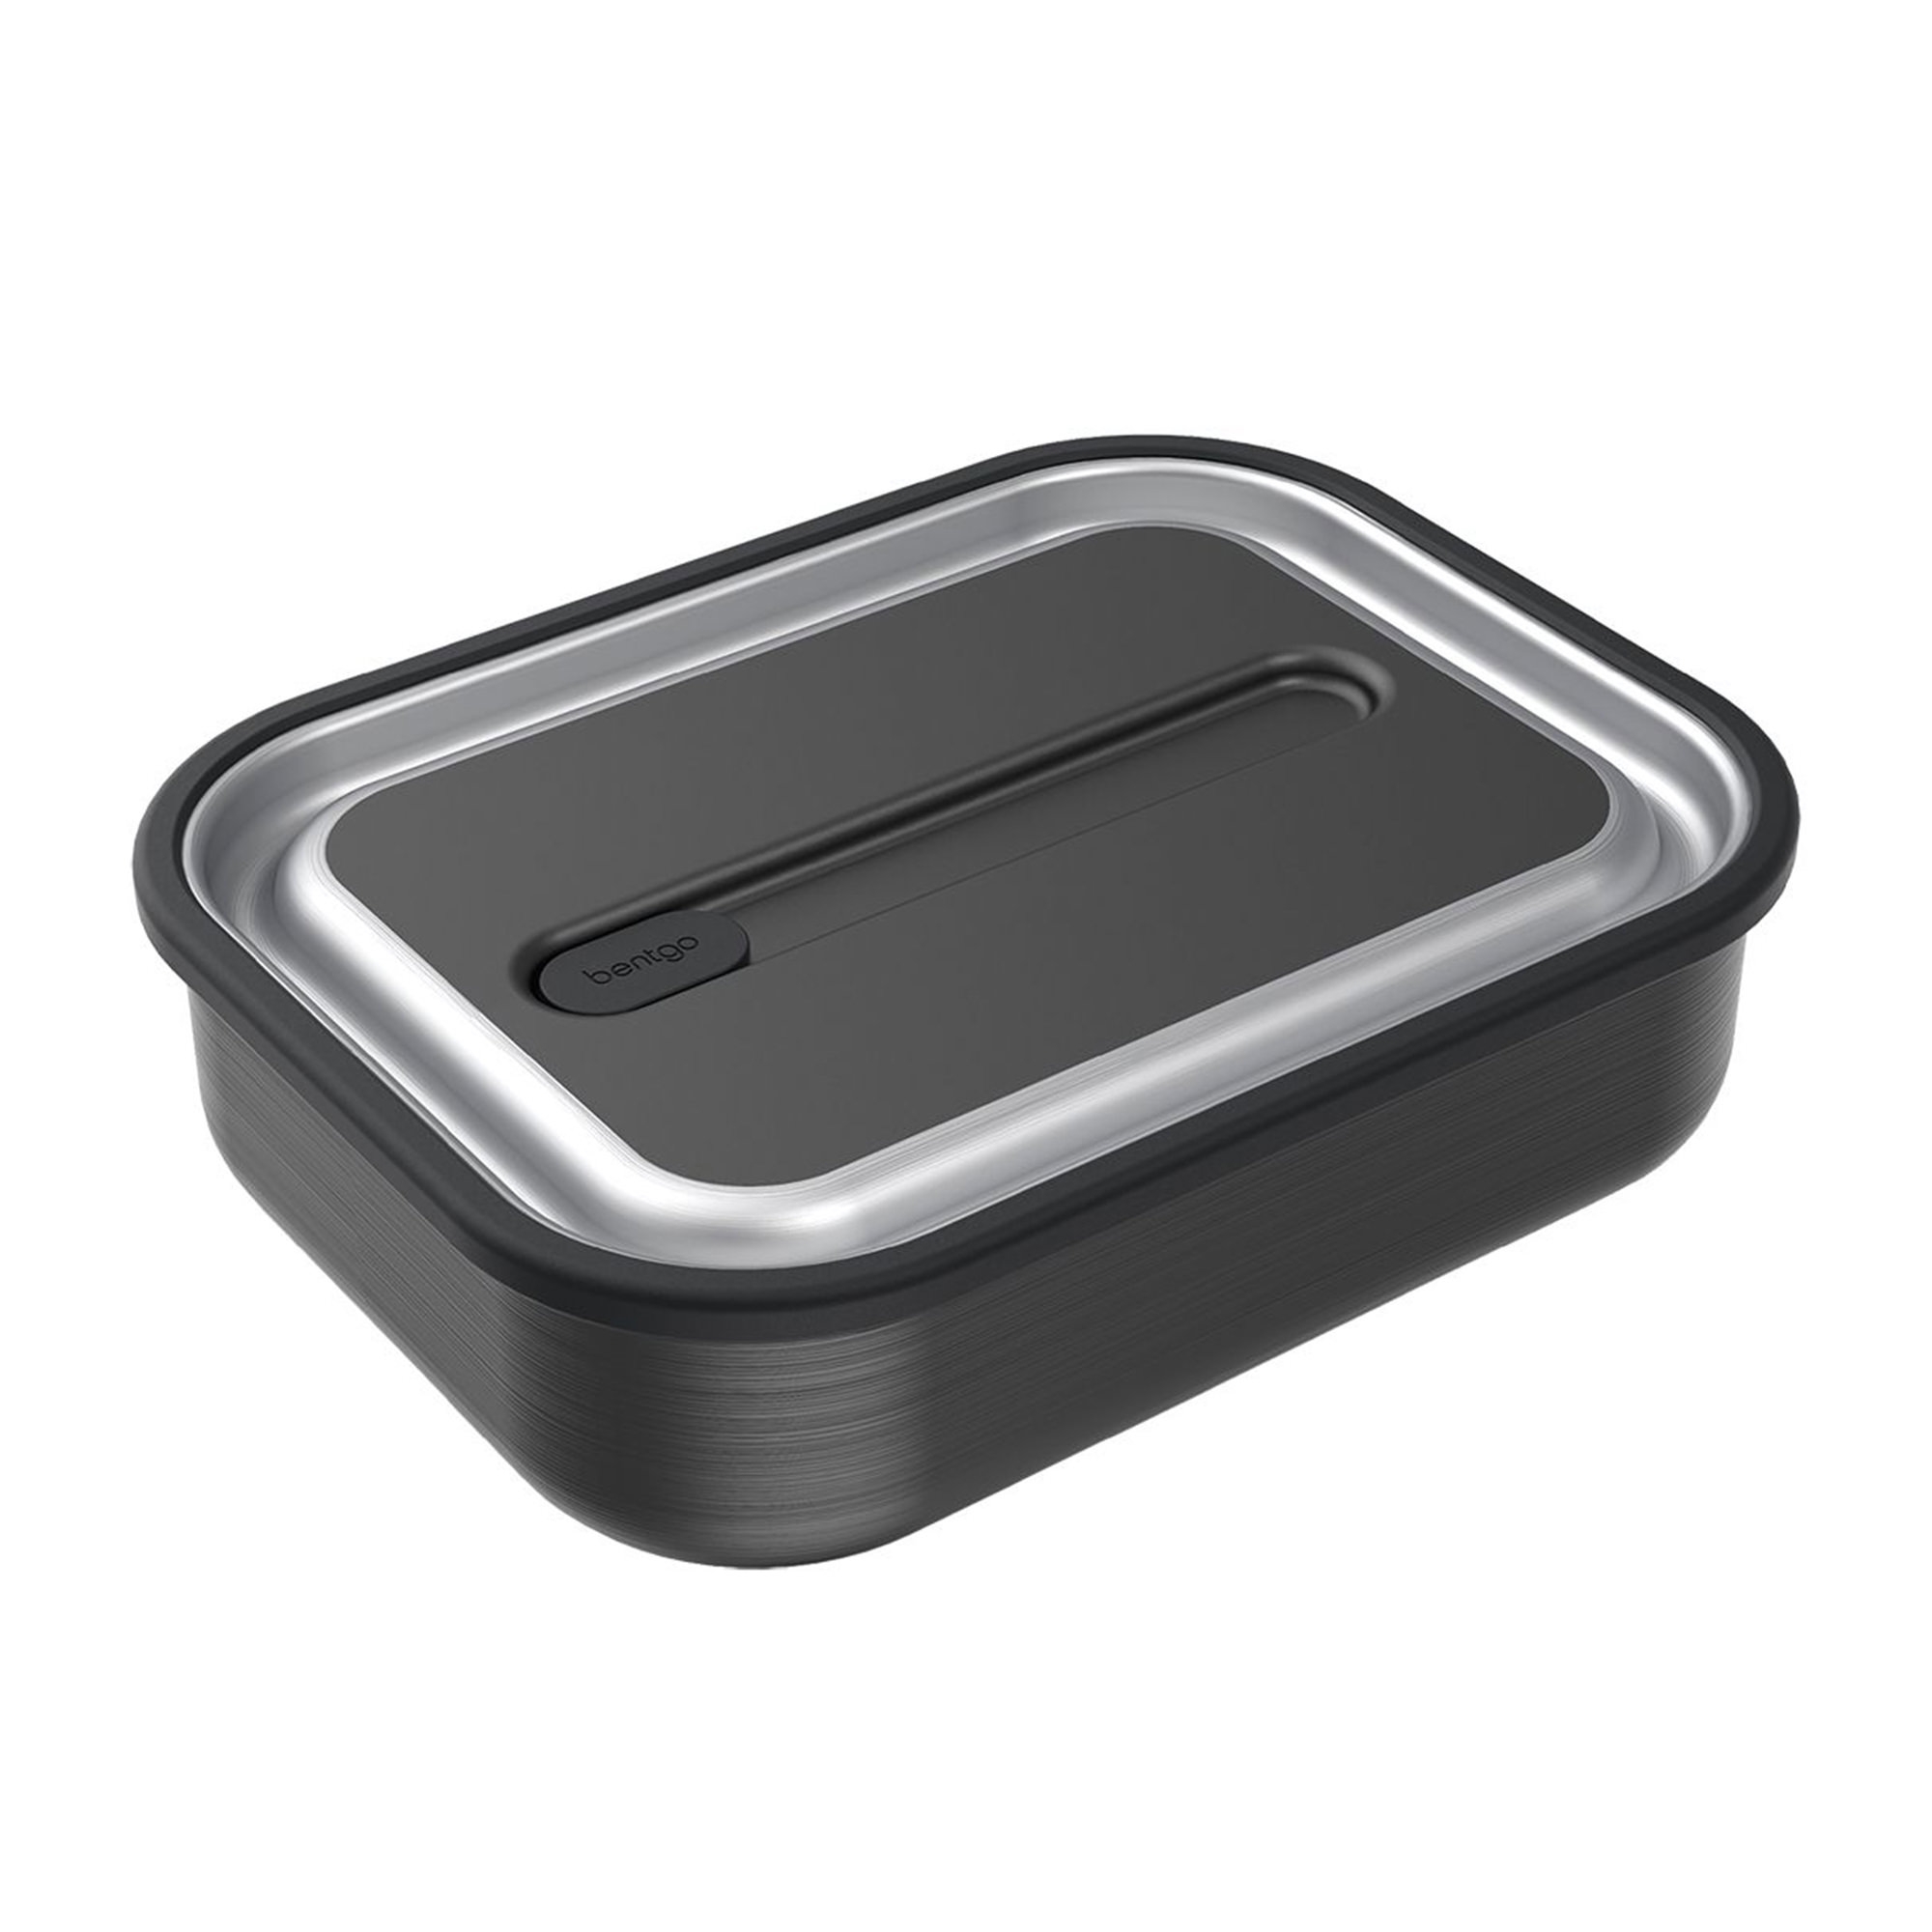 Bentgo Stainless Steel Leak Proof Lunch Box 1.2L Carbon Black Image 1